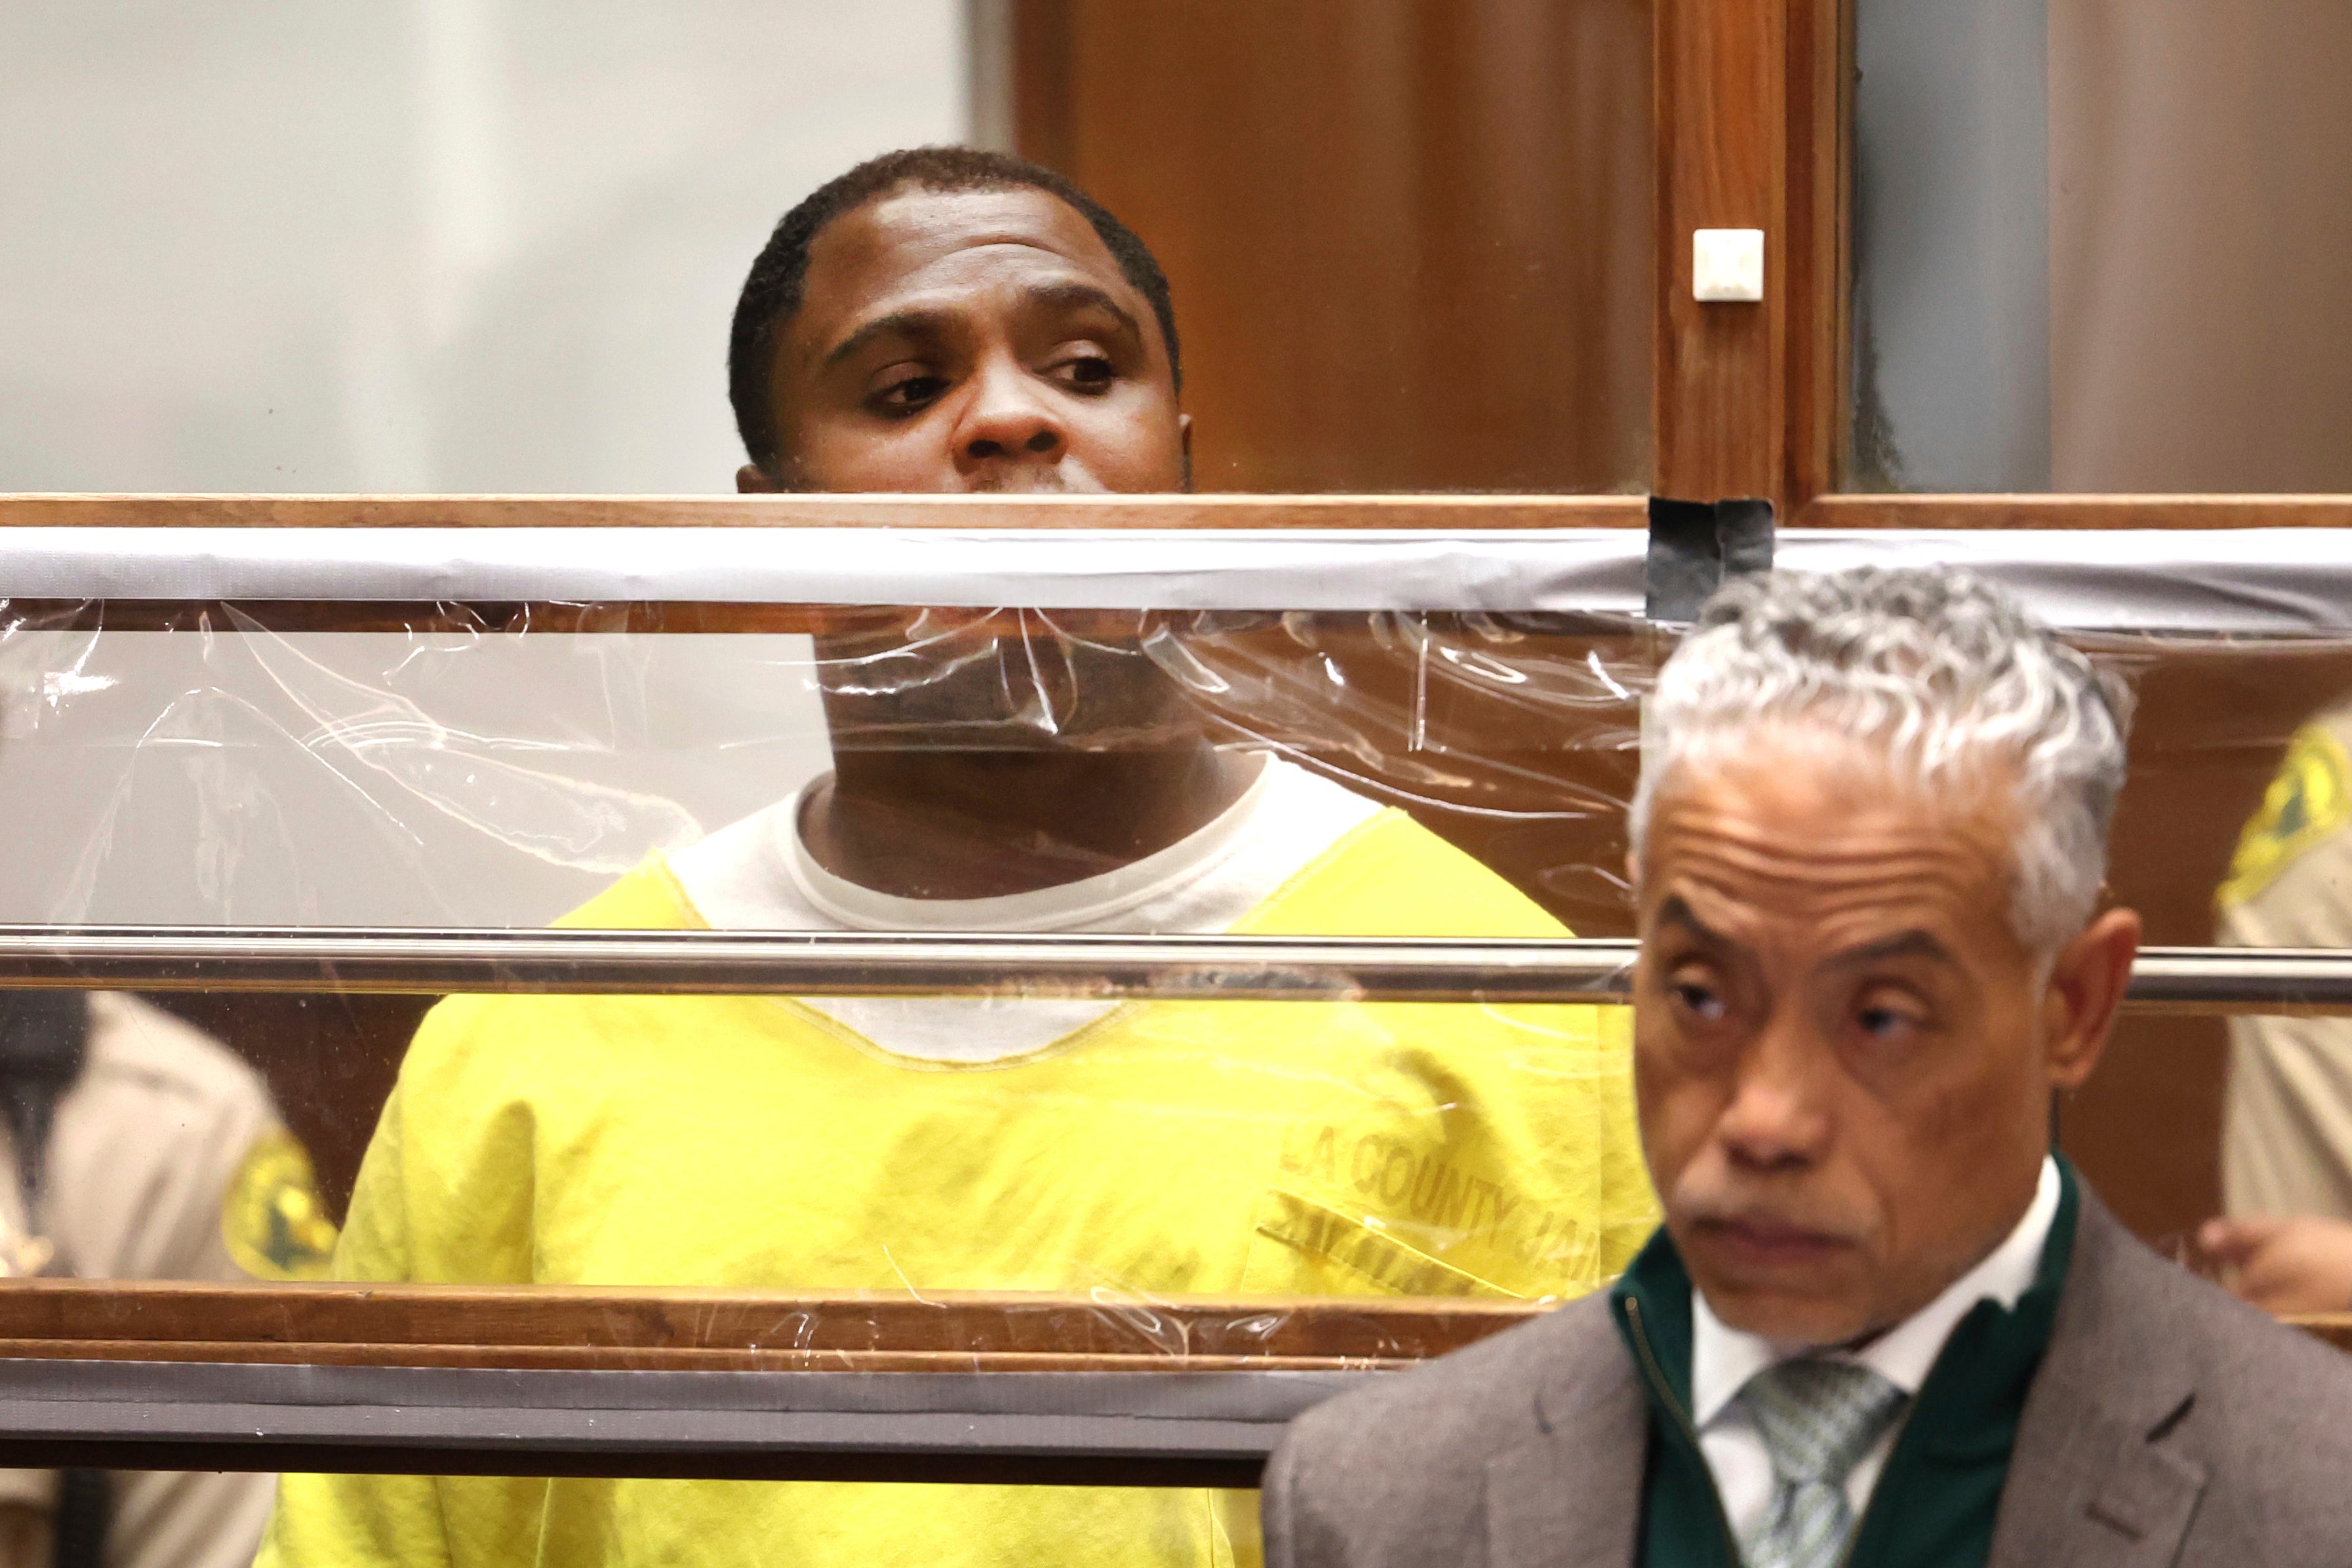 Jerrid Joseph Powell appears at an arraignment at Los Angeles superior court on Monday